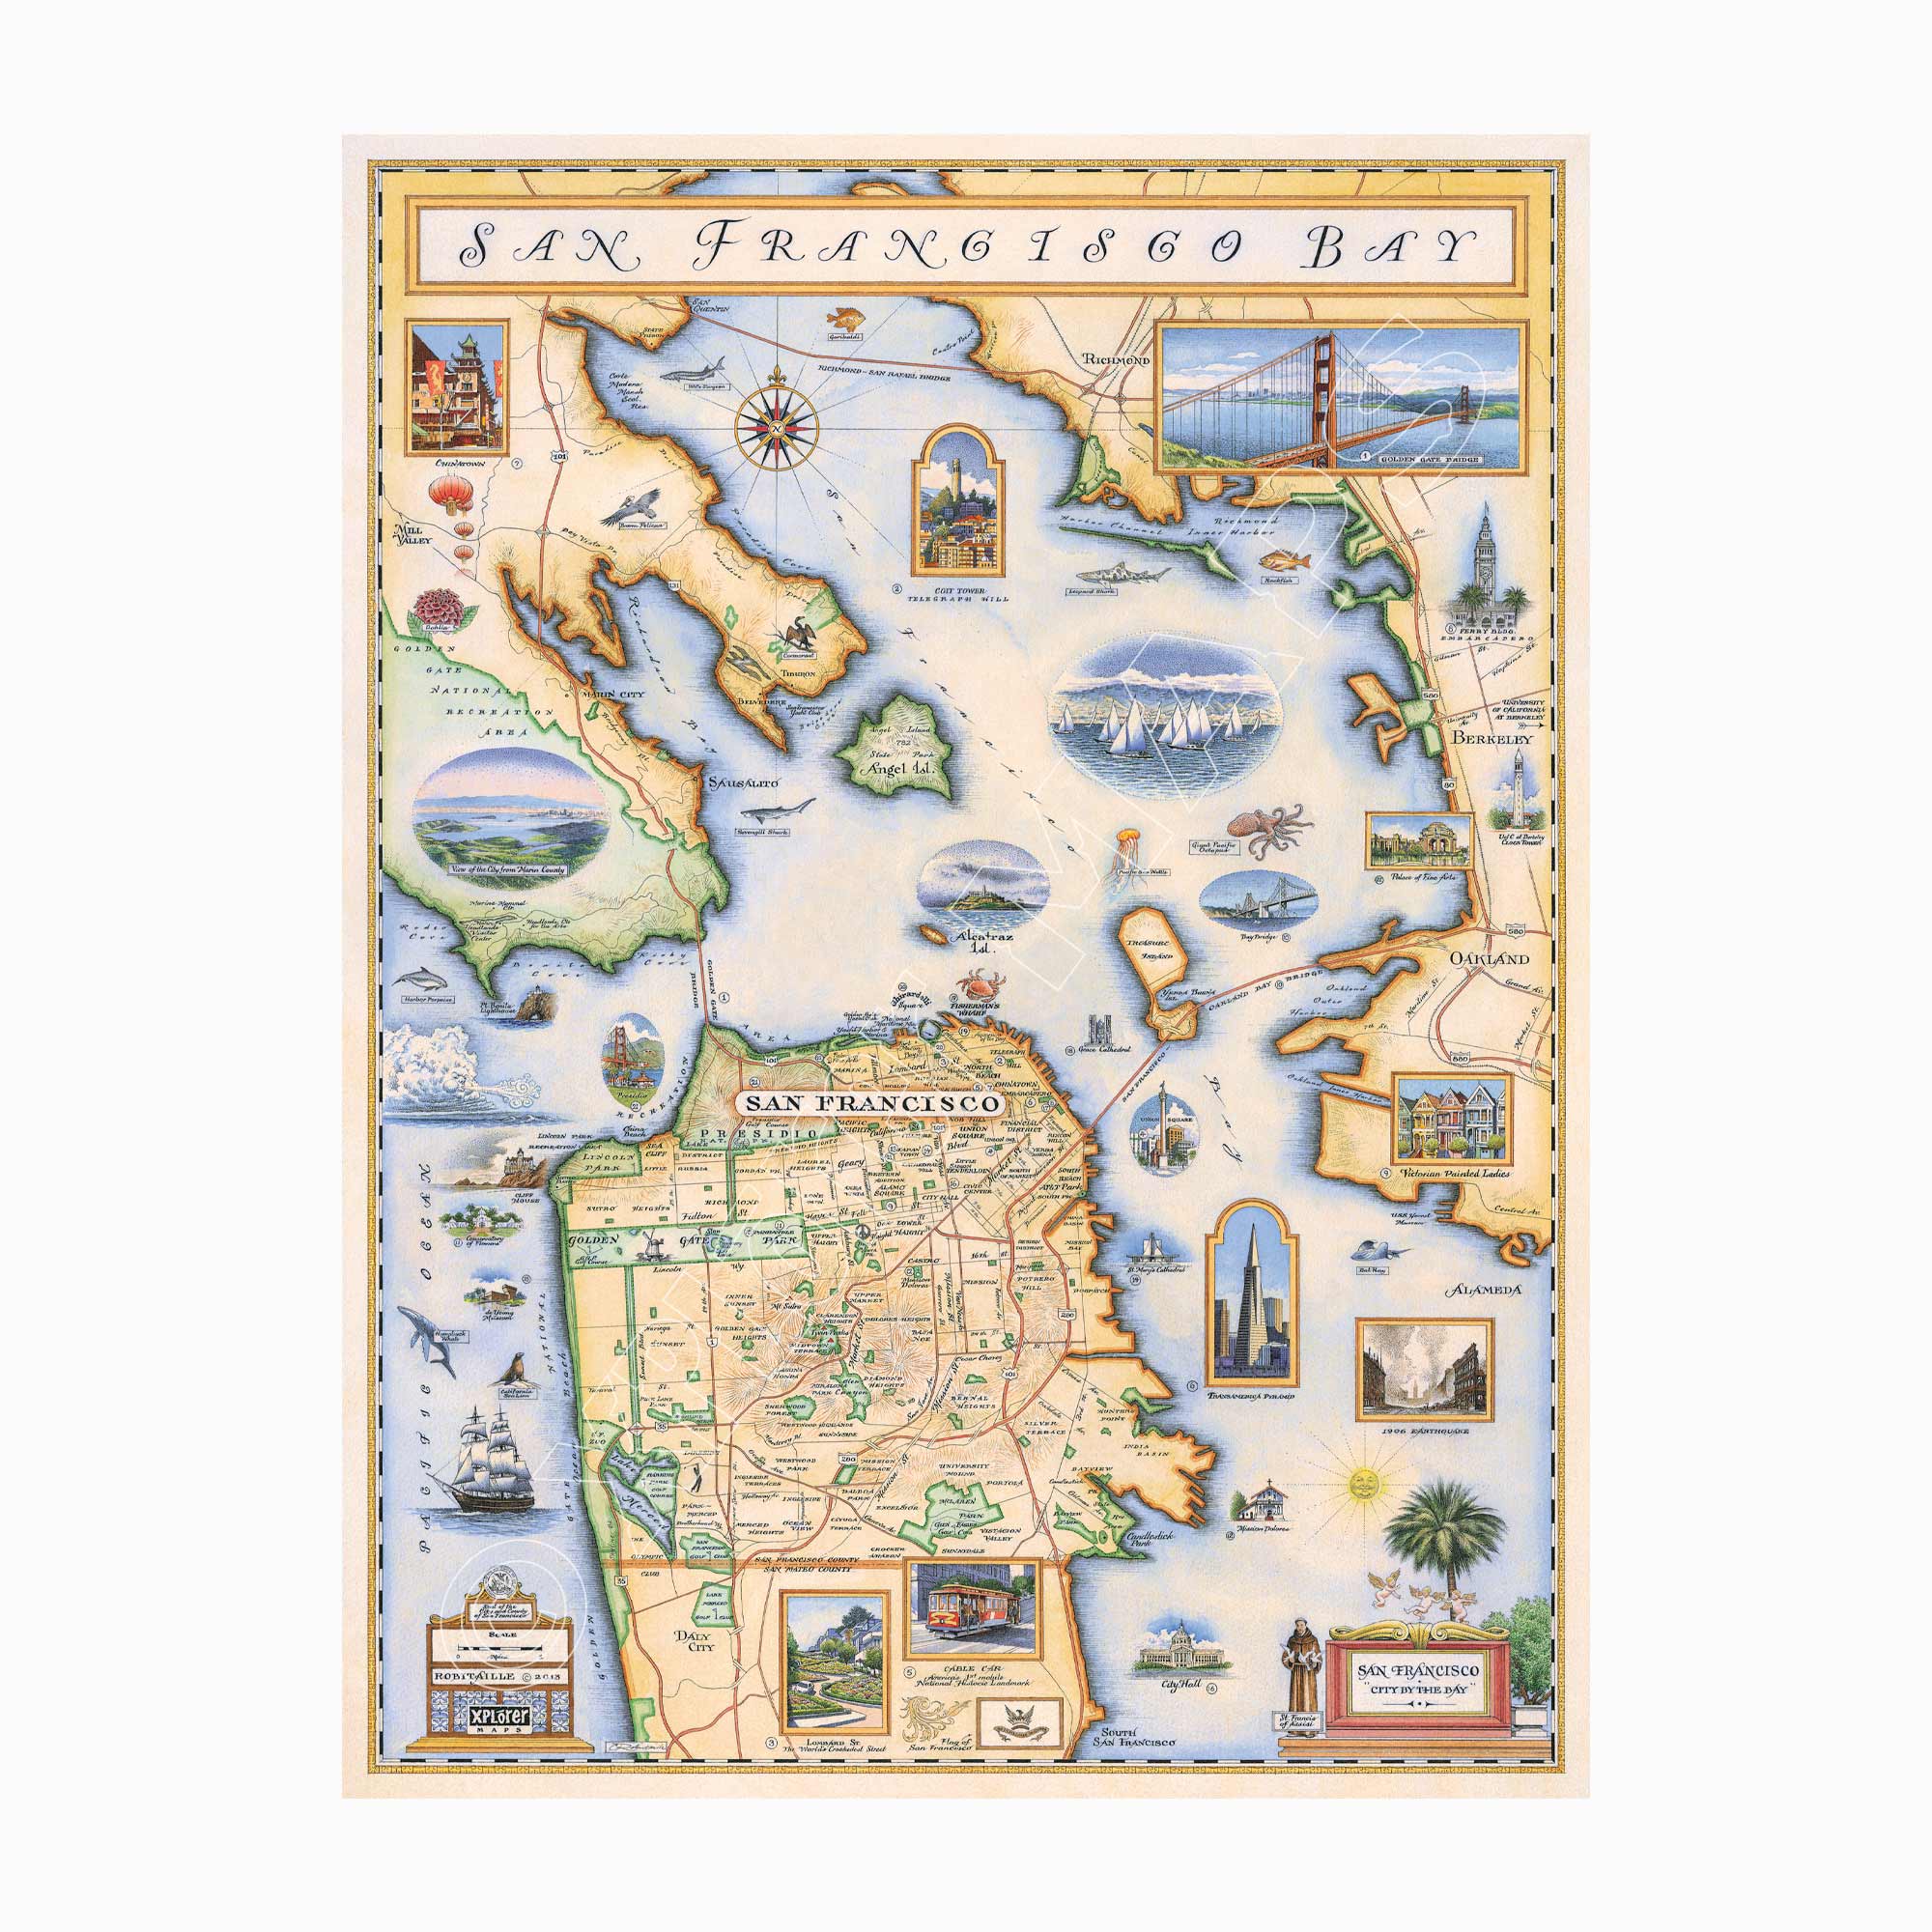 San Francisco Bay hand-drawn map in earth tones of beige, green, and blue earth tones. The map features illustrations of places such as Candlestick Park, Fisherman's Wharf, Transamerica Pyramid, and Alcatraz Island. Flora and fauna include octopus, crab, palm trees, and a dahlia. Measures 18x24.